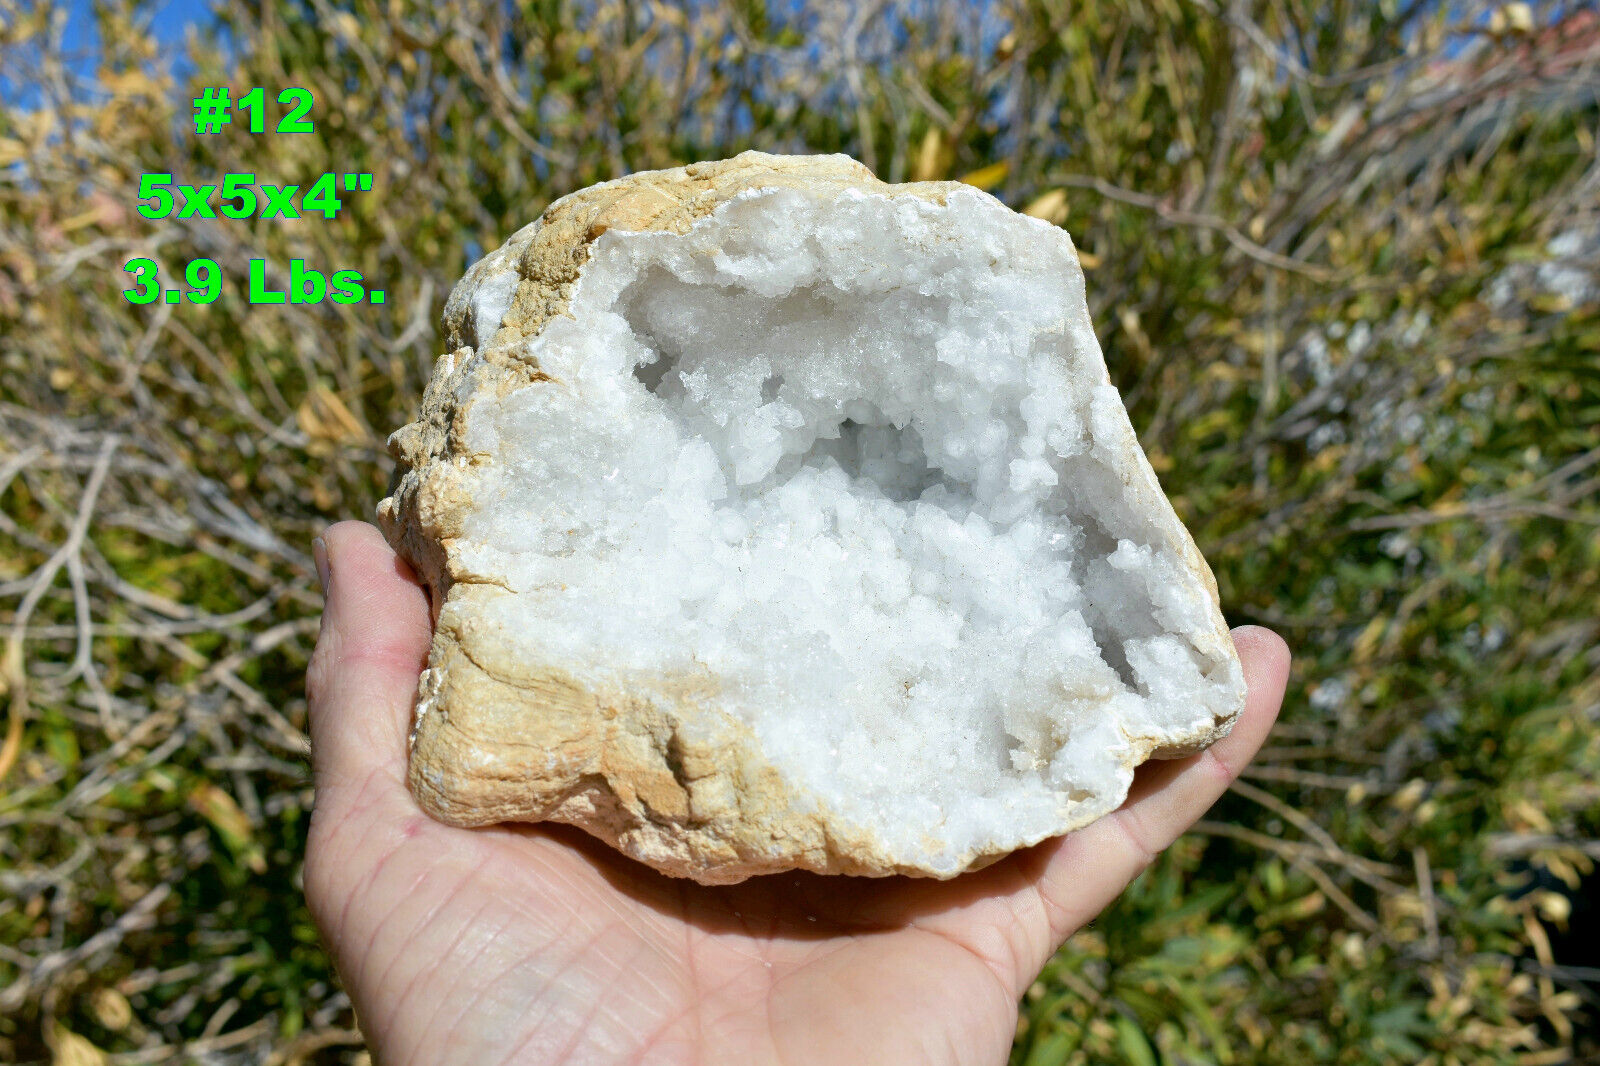 Large OPEN GEODES w/ Quartz Crystal Center * Choose EXACT GEODE * Morocco